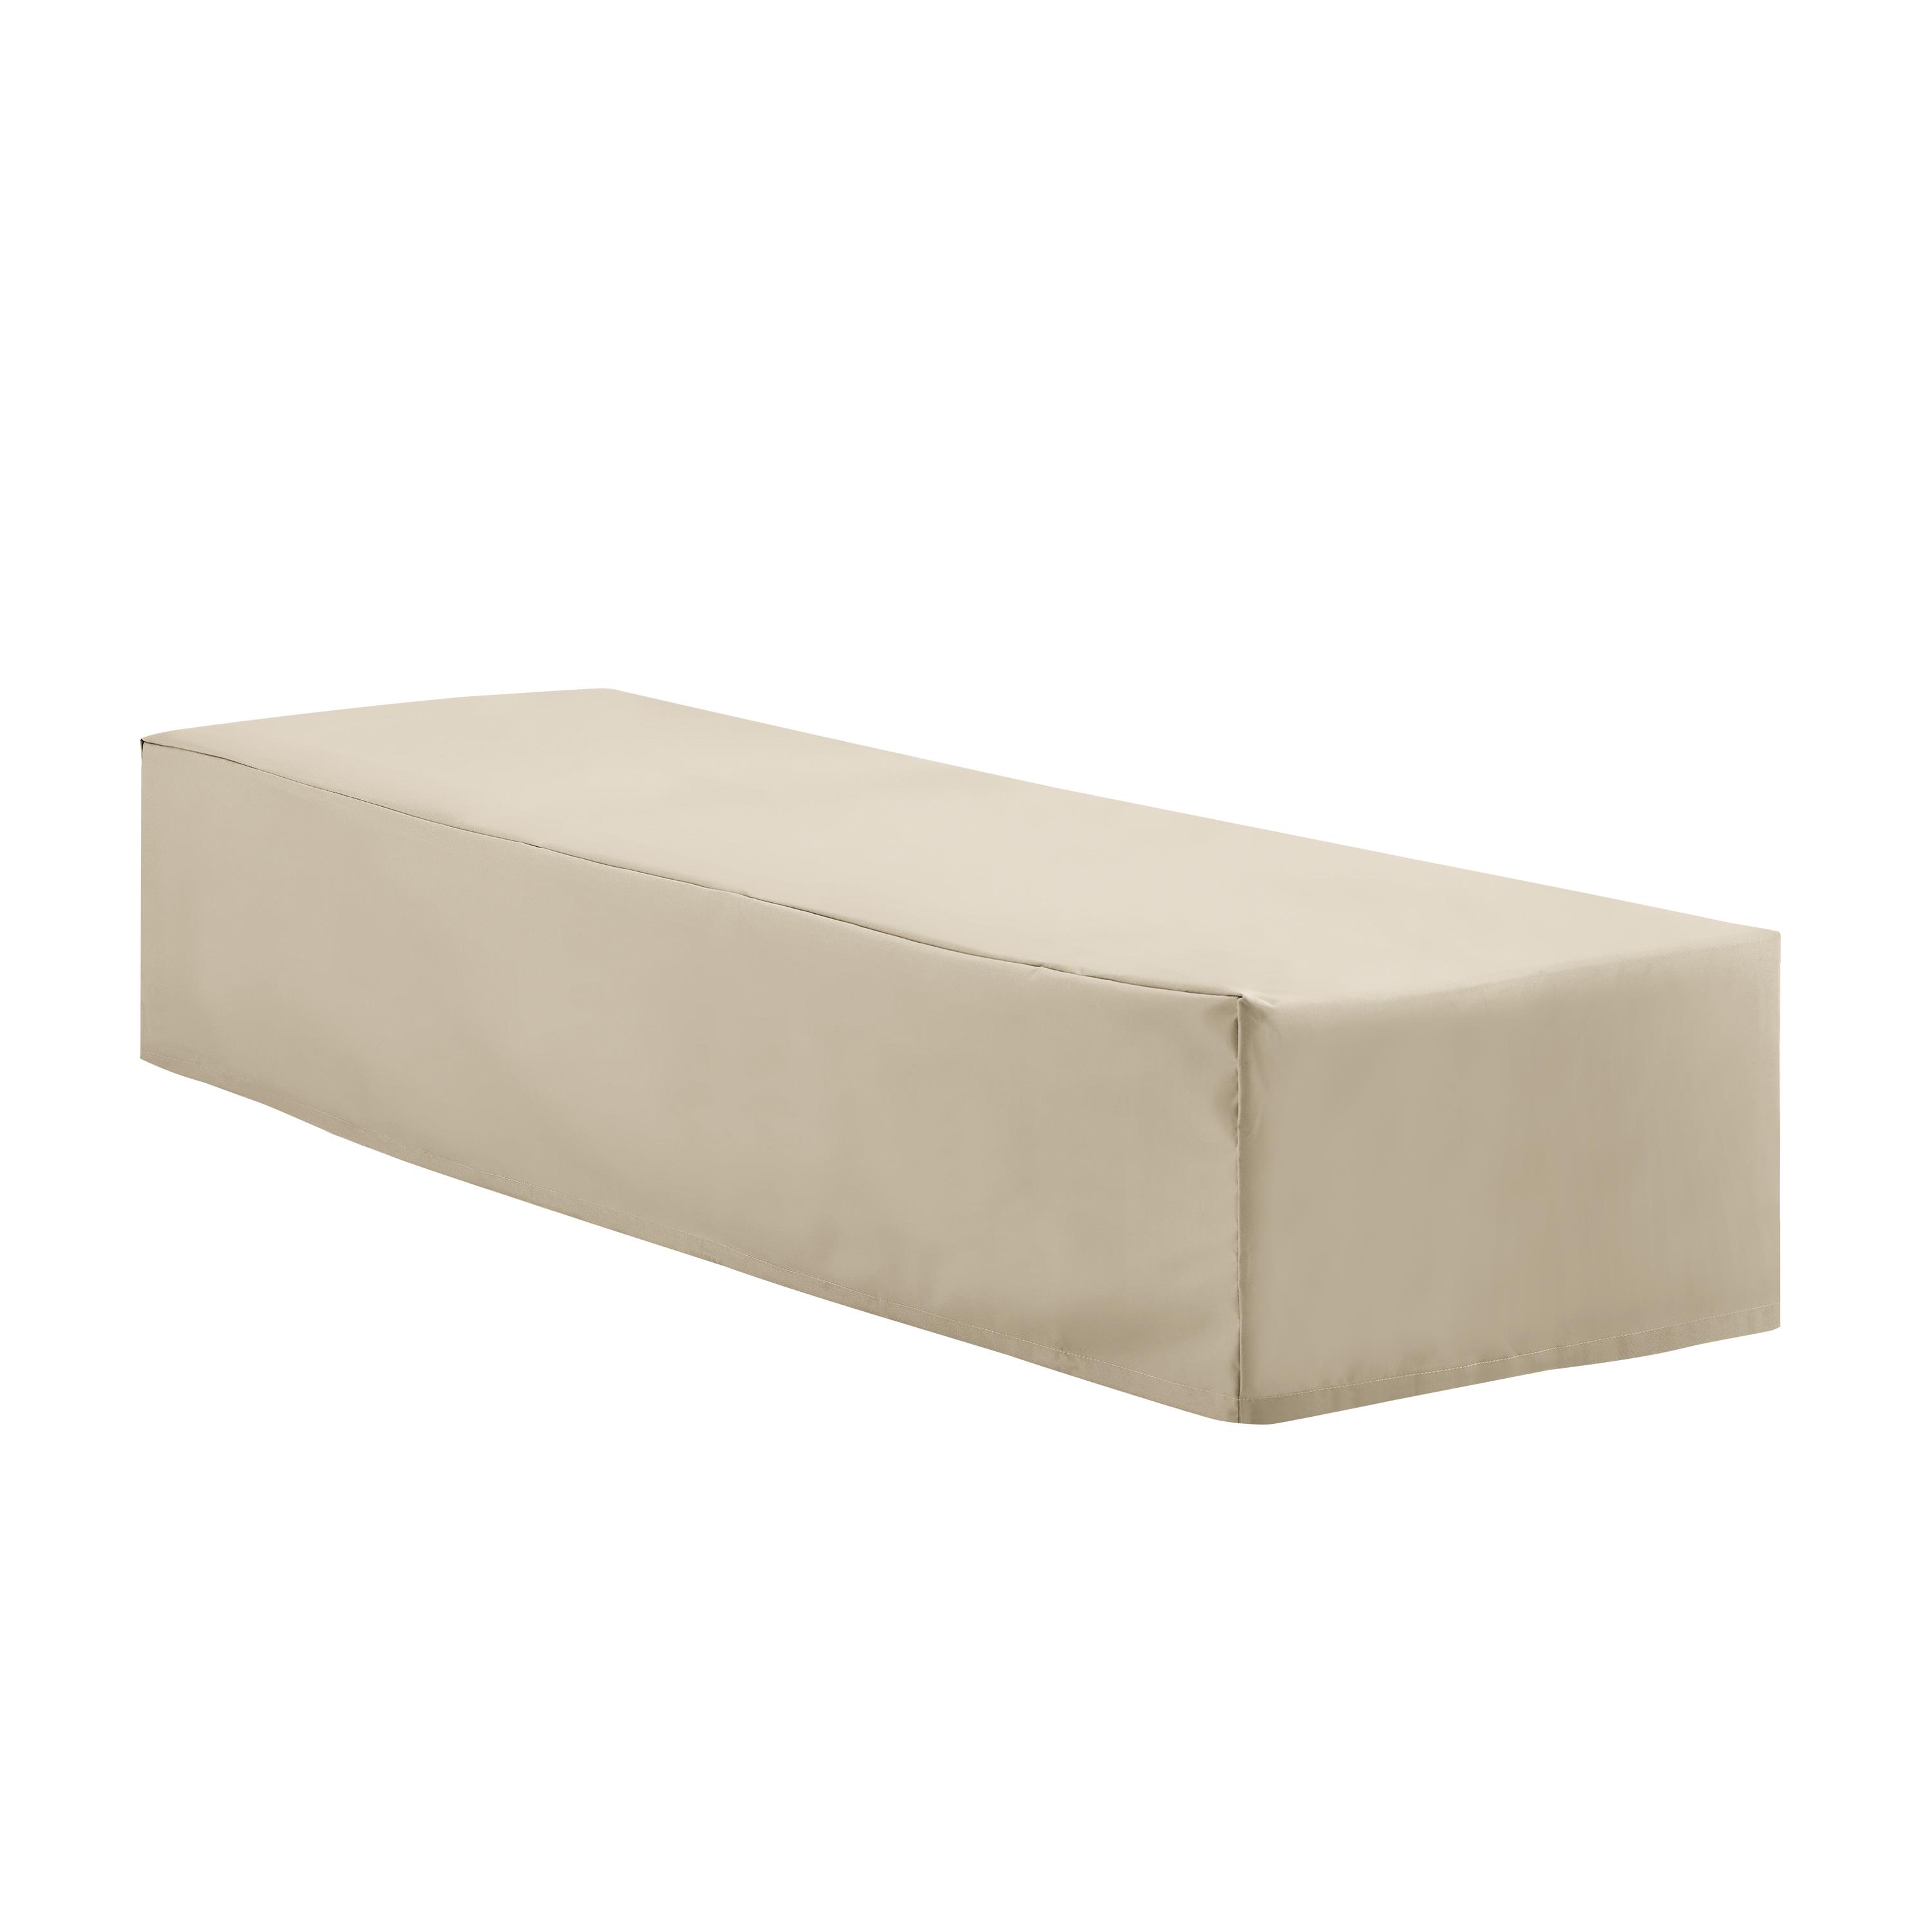 Crosley Brands  Outdoor Chaise Lounge Furniture Cover, Tan - image 2 of 7